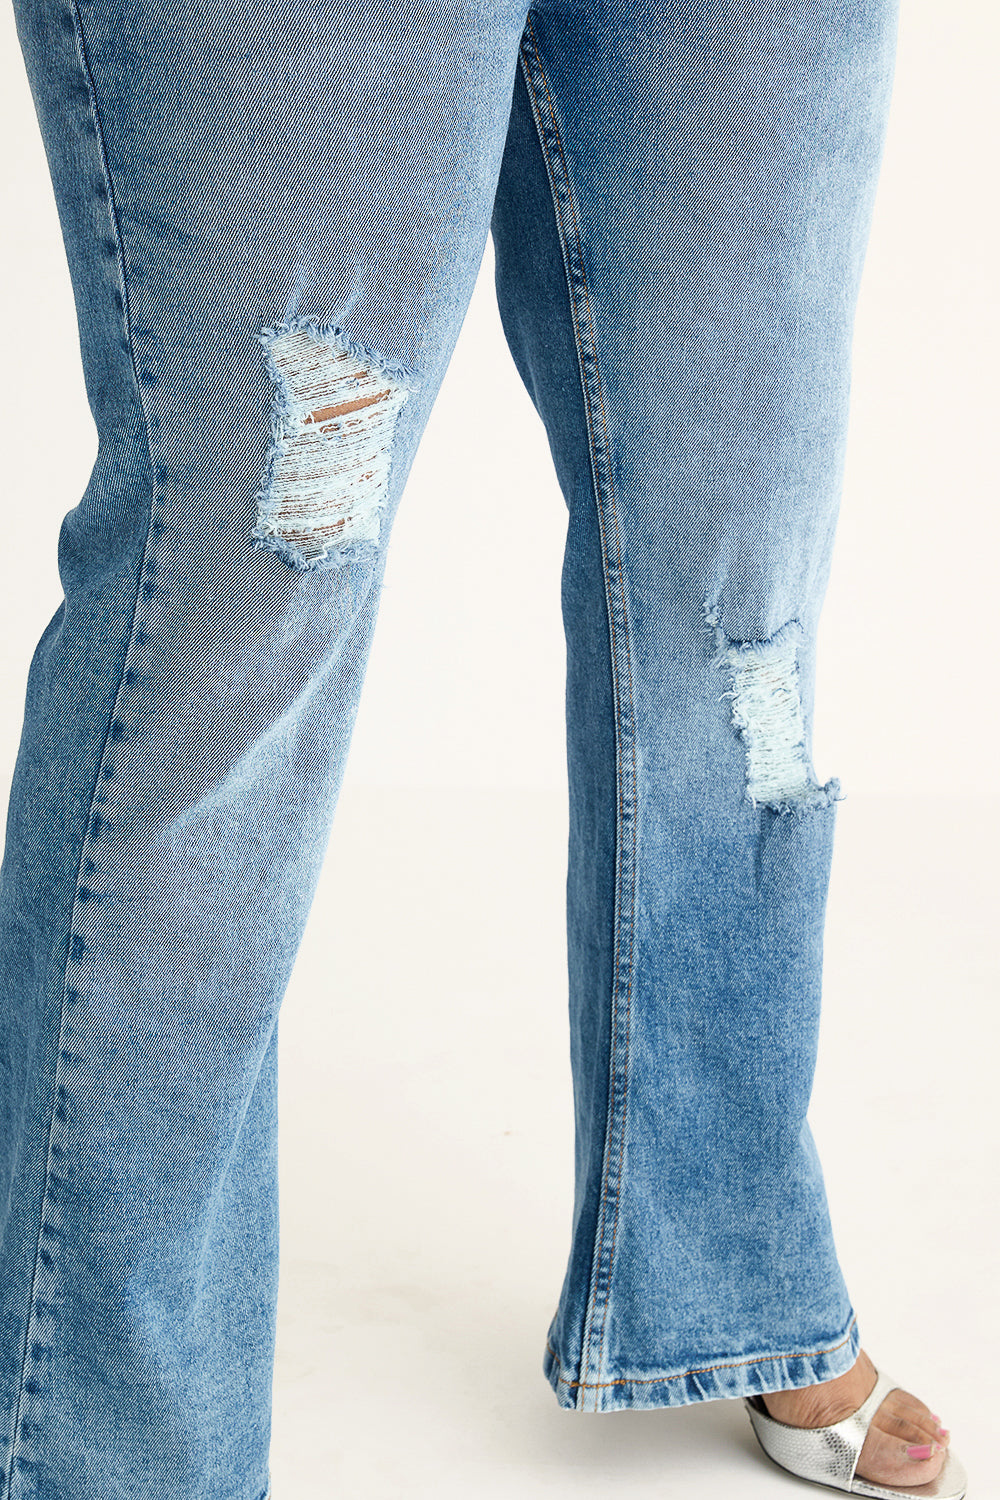 RADIANT CURVE DISTRESSED BOOTCUT JEANS